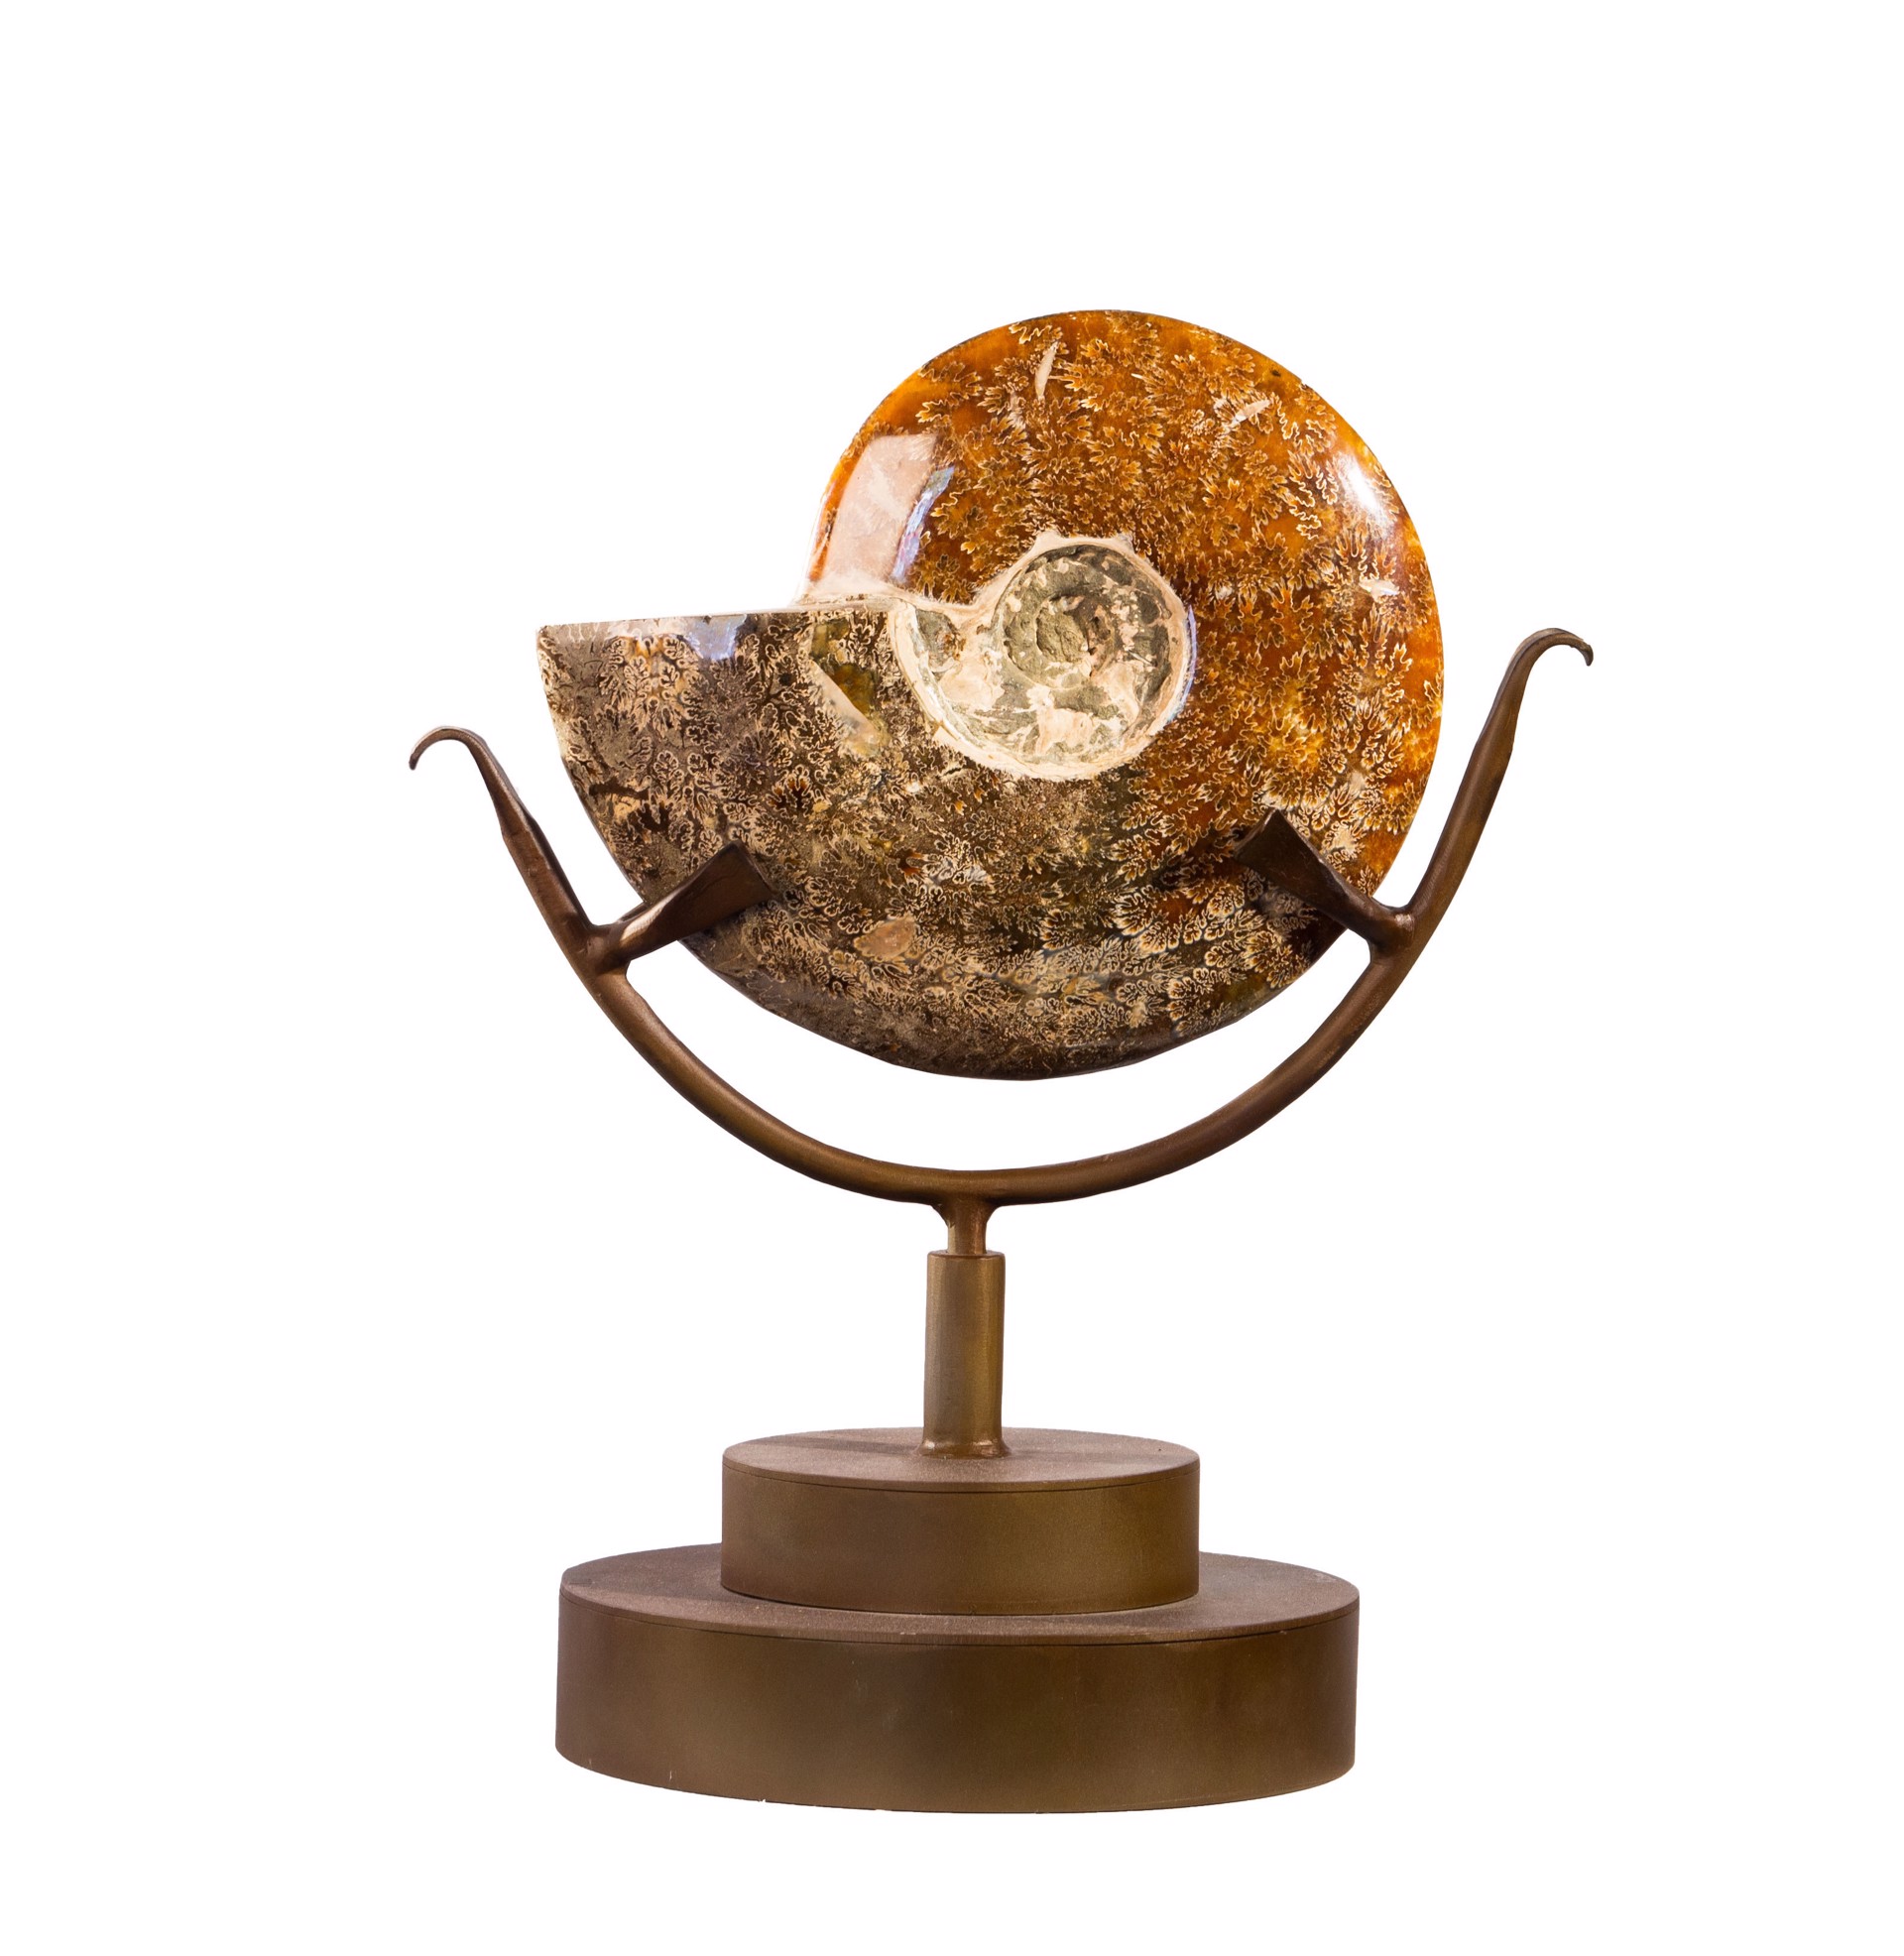 Ammonite on Spinning Stand by Jim Vilona